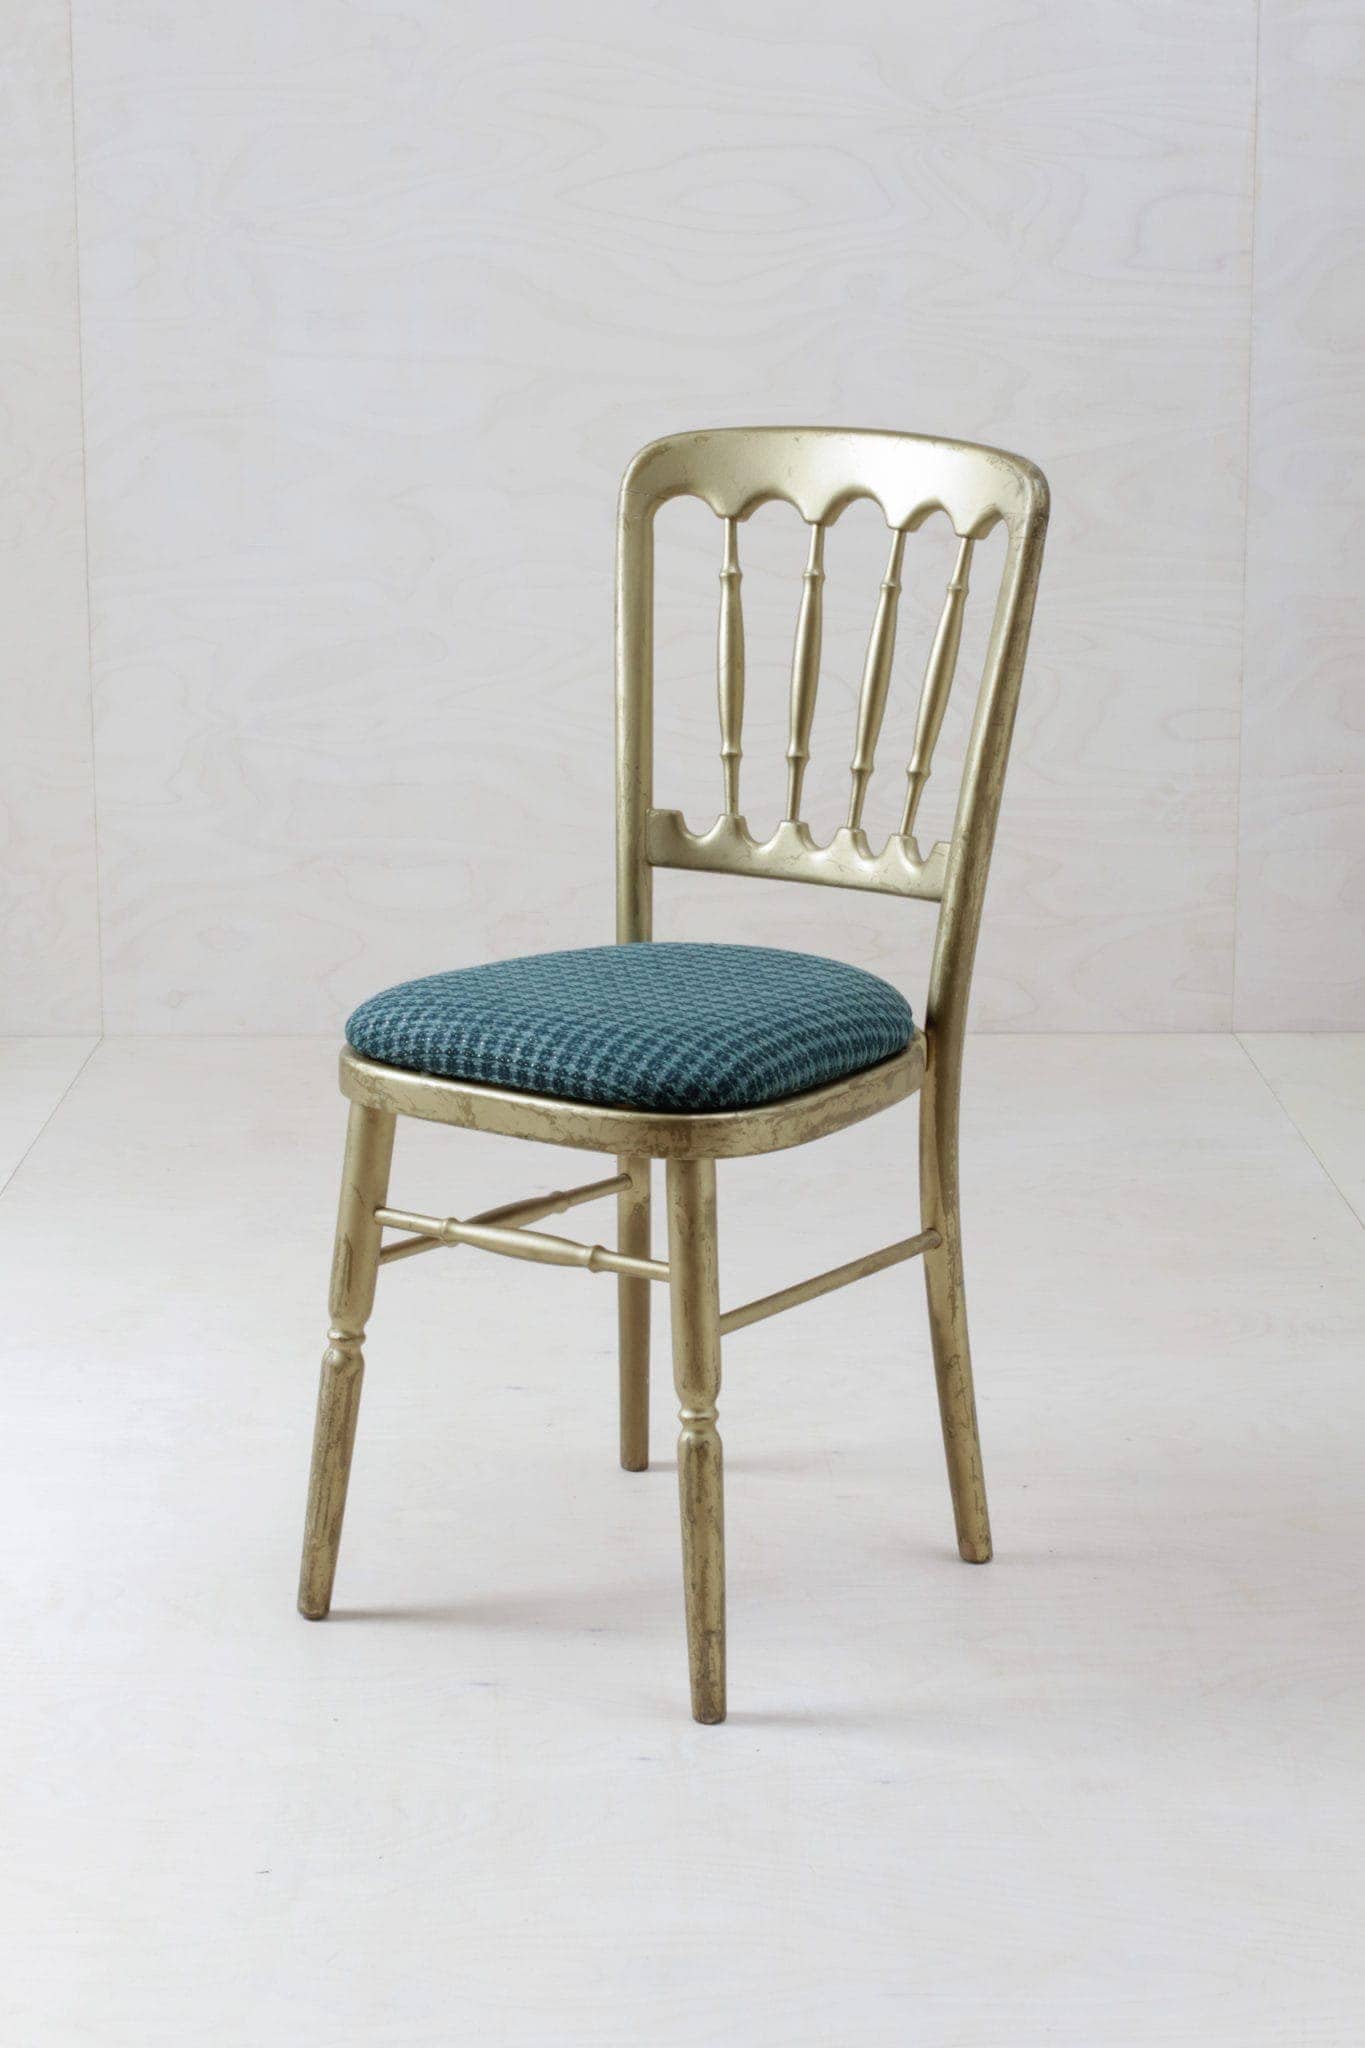 Chair Ester Gold | The Ester series is a collection of original vintage chairs in Chiavari style from the Vienna Opera.The chairs are golden and can be combined with different seats and cushions. You can choose between seat cushions in enchanting white-gold, exciting jungle green, black or plain wicker.Please request the chair cushions separately, specifying the desired colour. | gotvintage Rental & Event Design